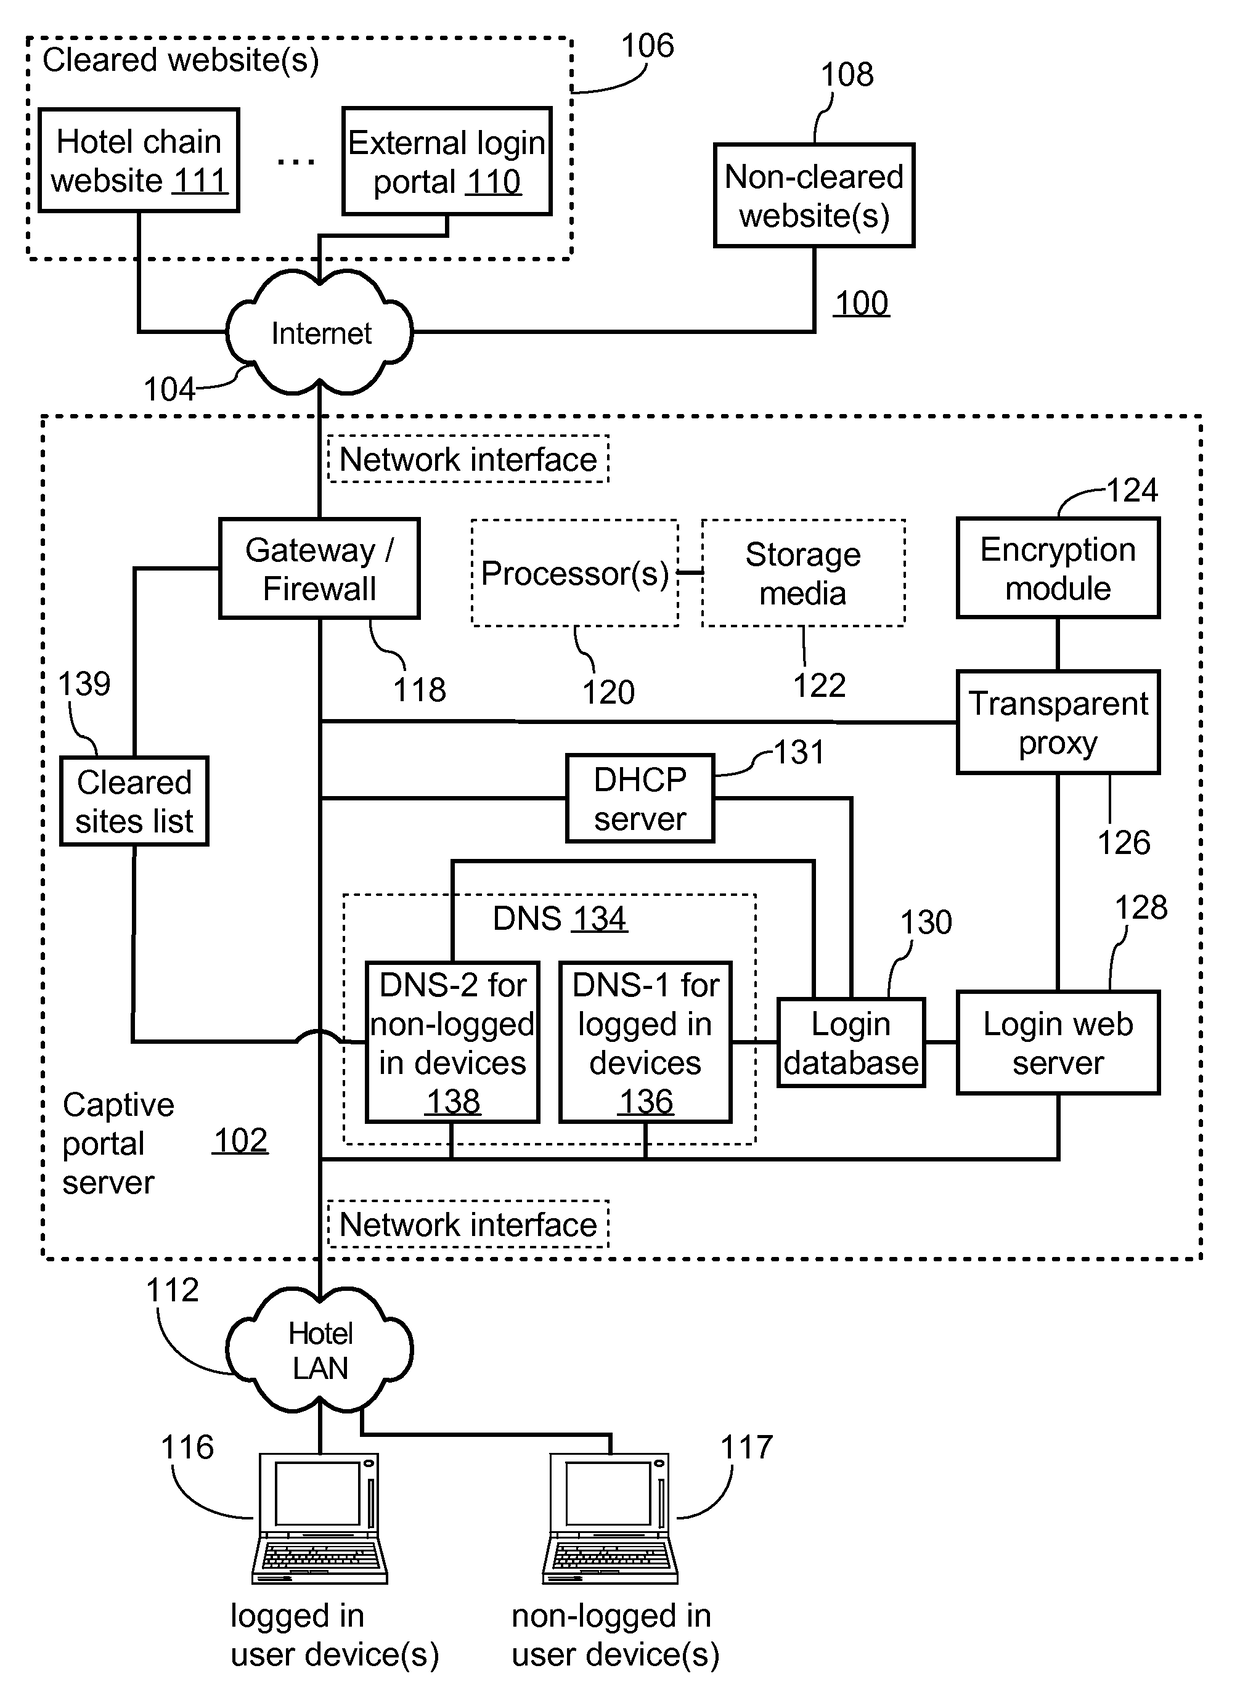 DNS-based captive portal with integrated transparent proxy to protect against user device caching incorrect IP address